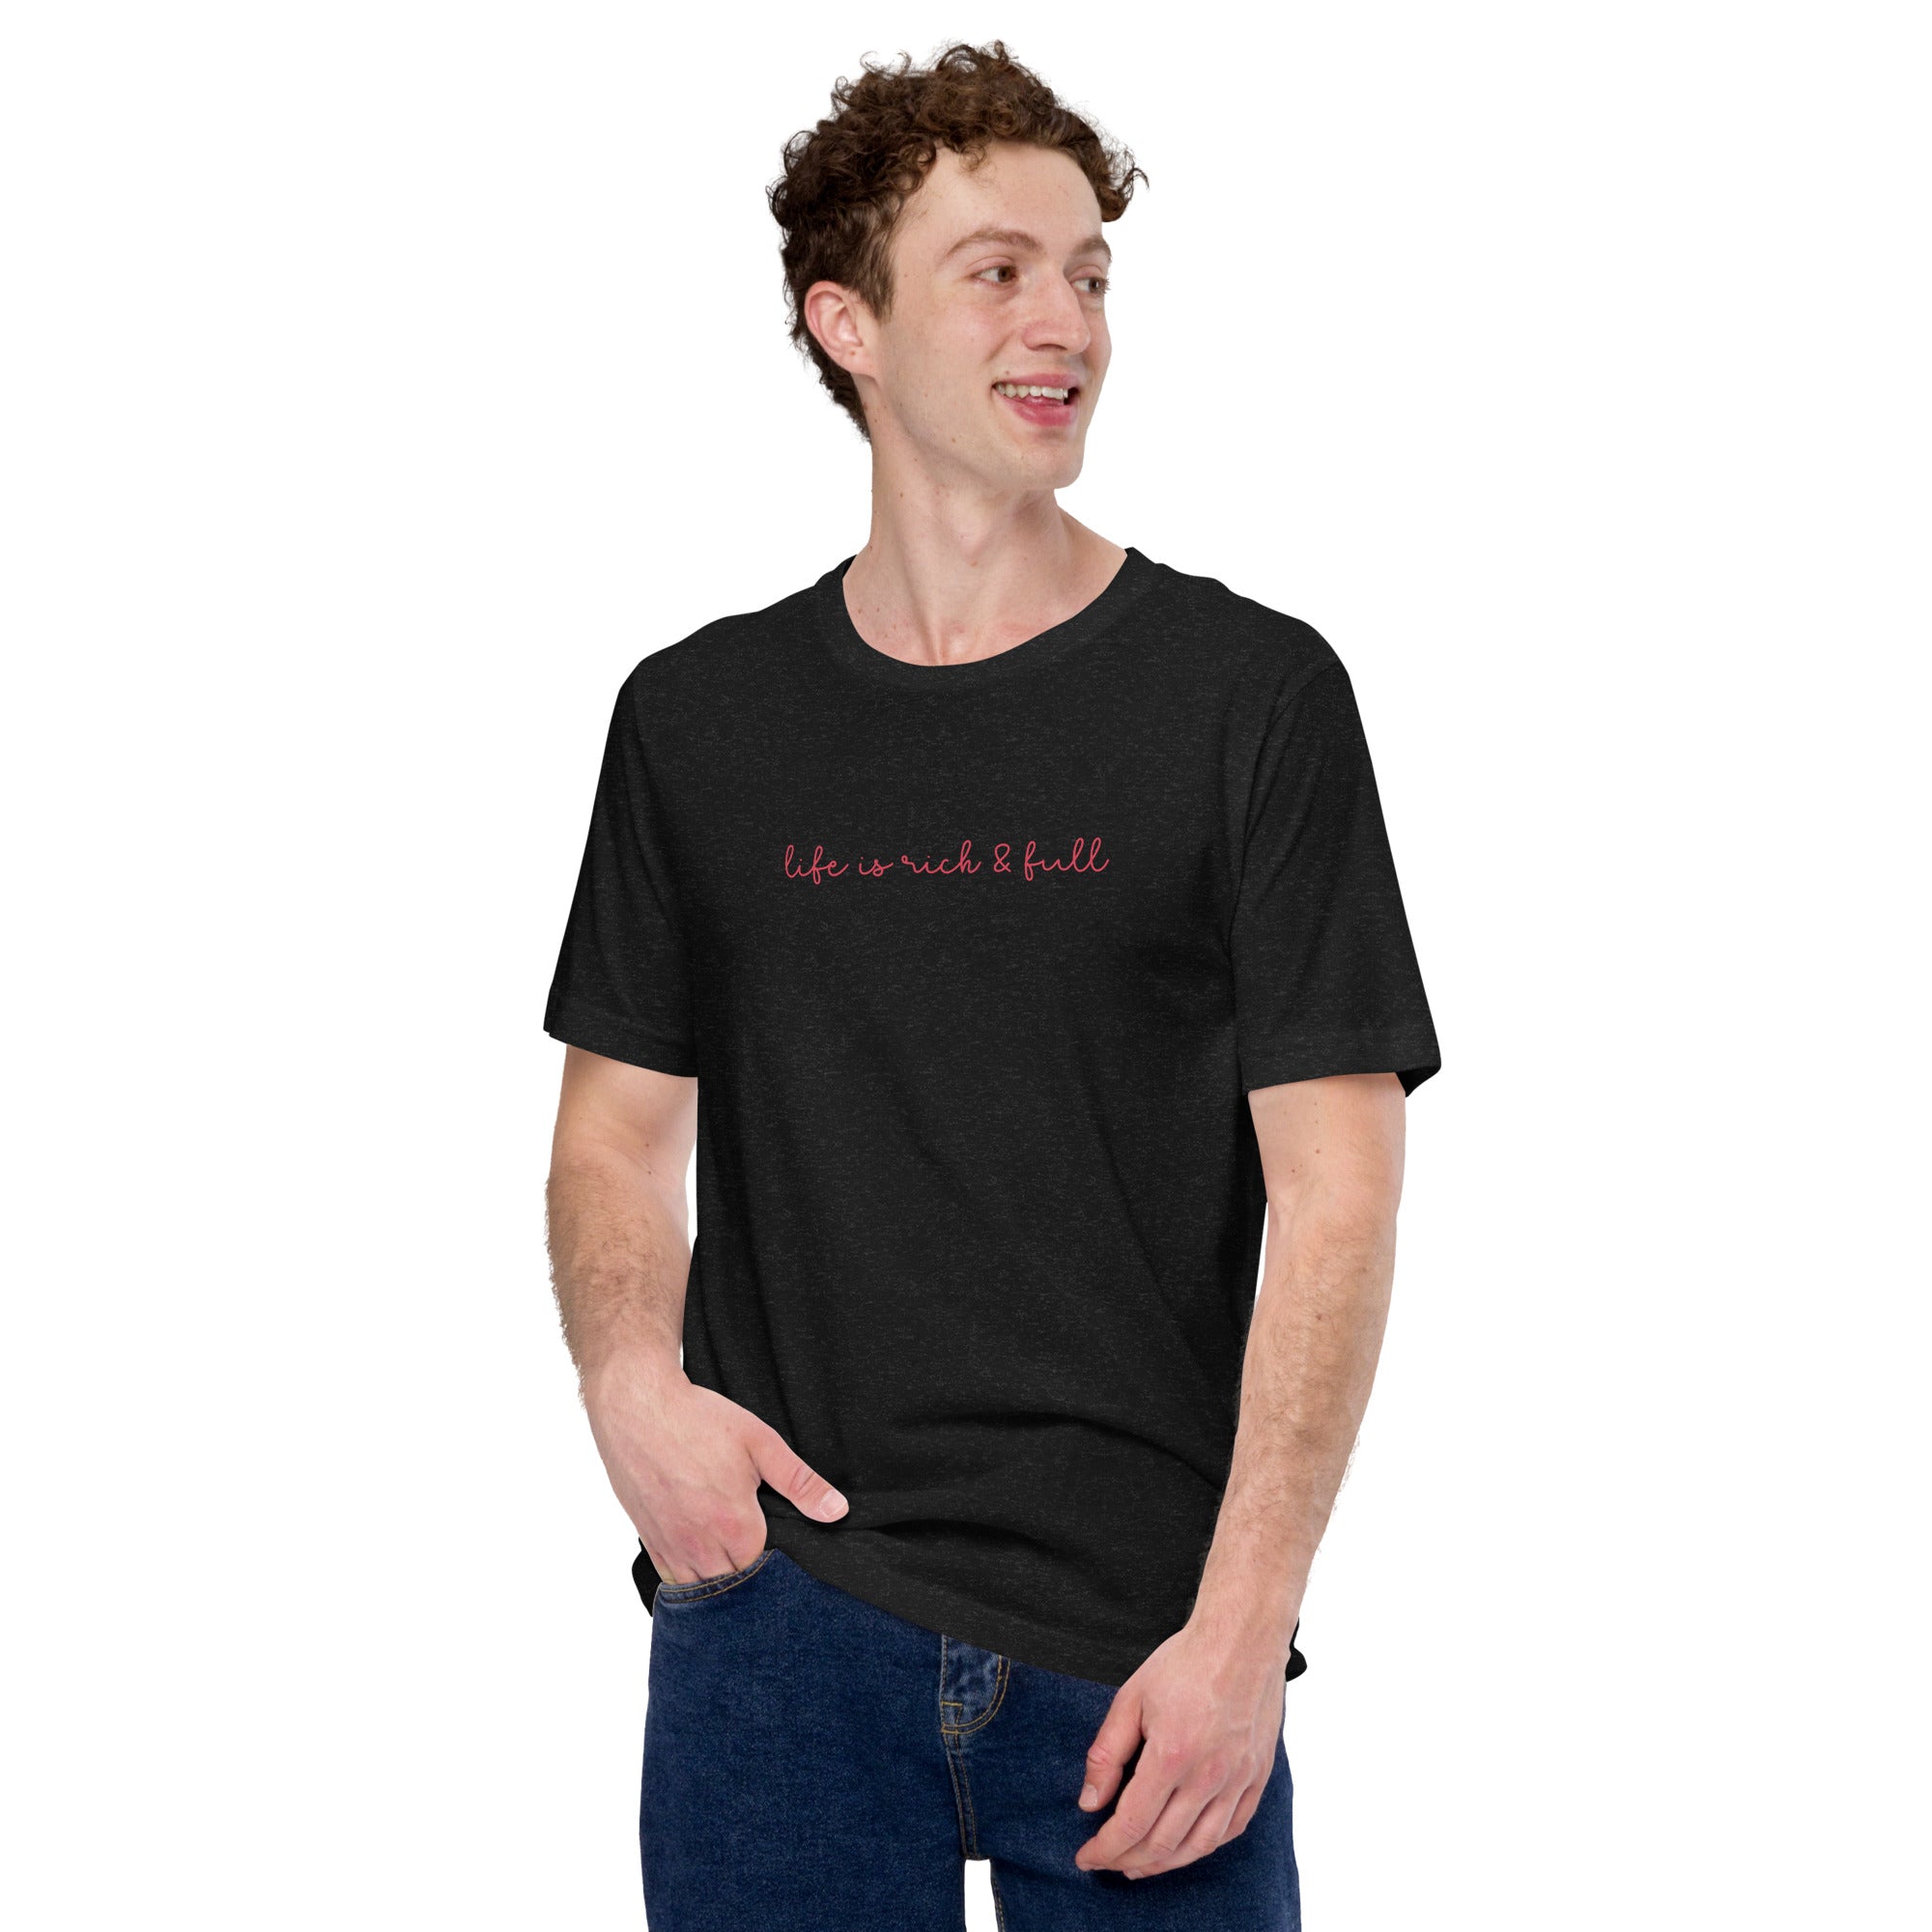 Your Life Is Rich And Full, Premium Short-Sleeve Unisex T-Shirt | Positive Affirmation Tee